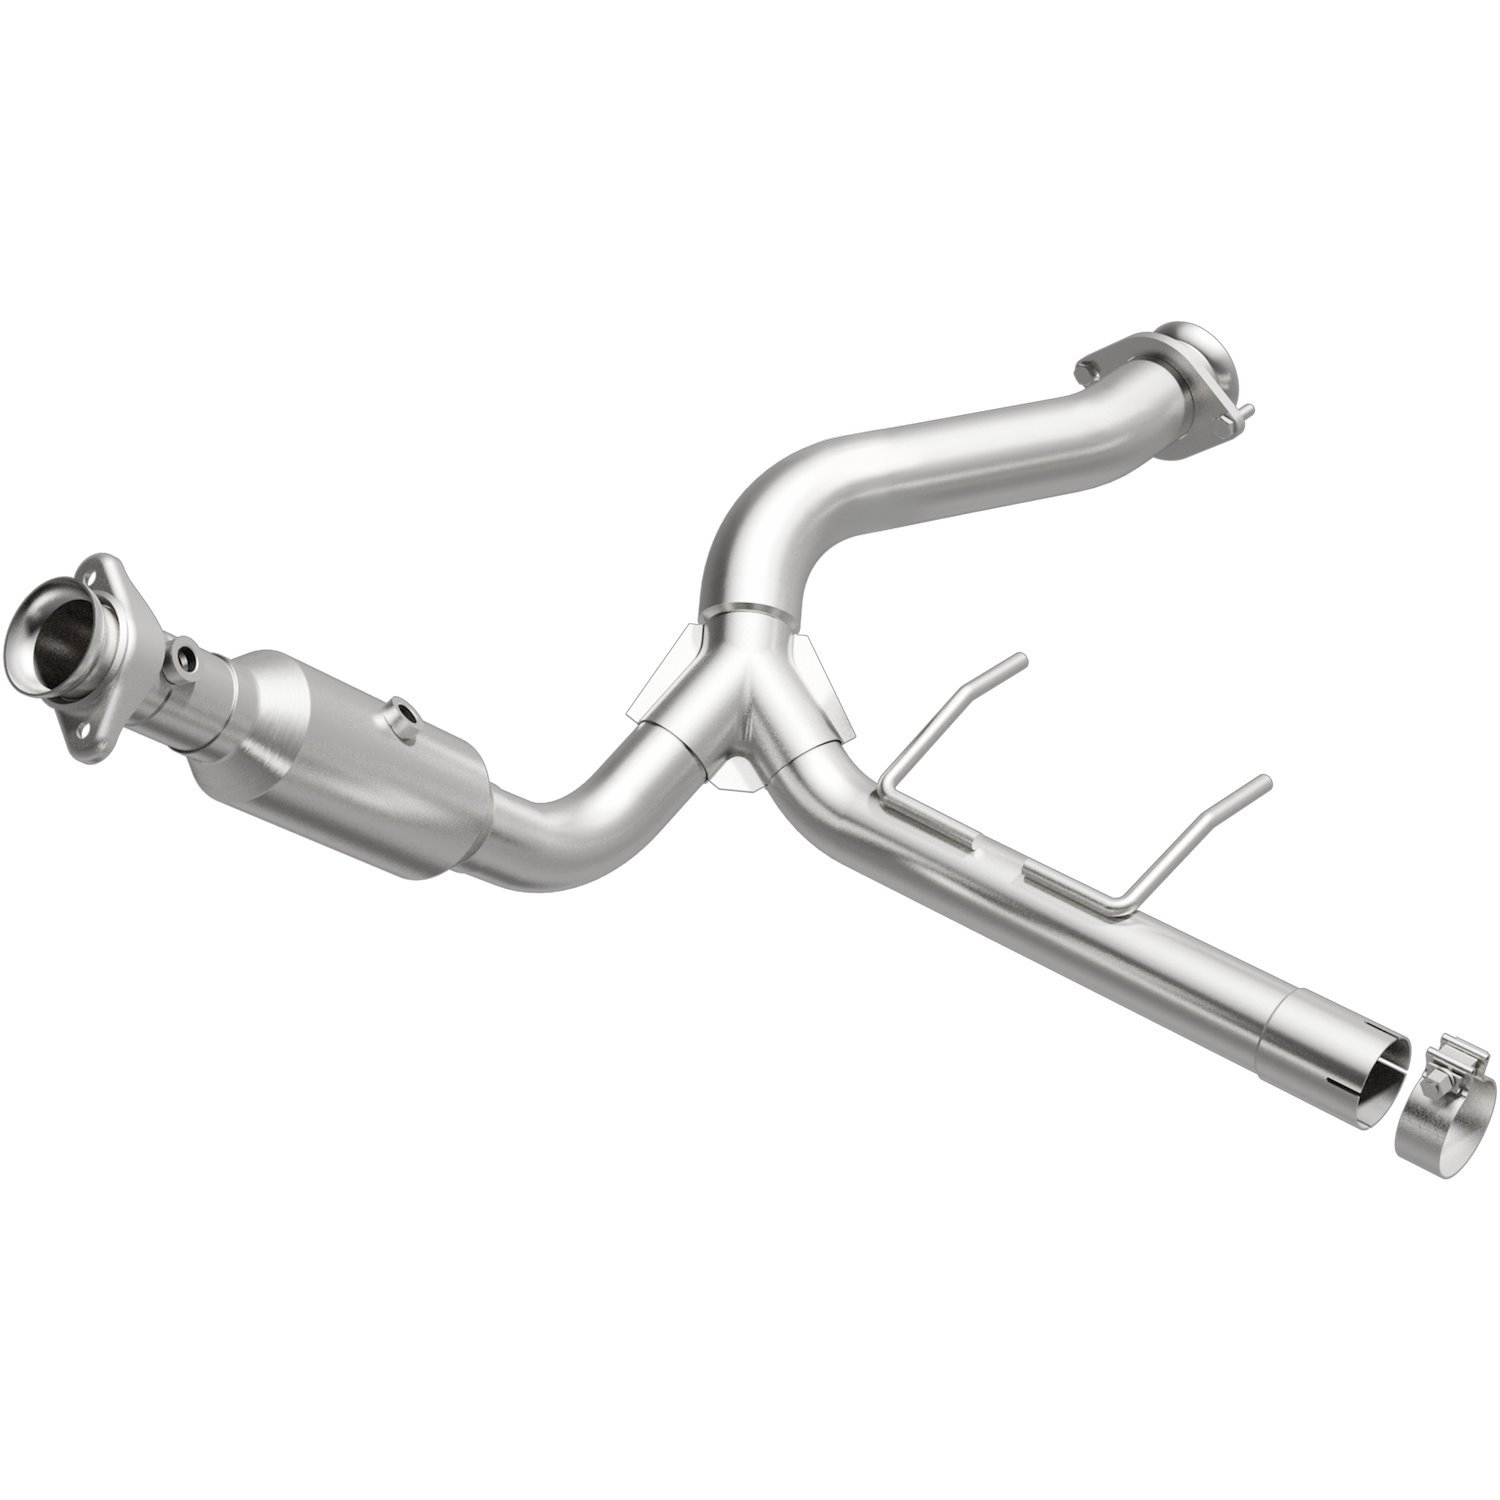 2009-2010 Ford F-150 California Grade CARB Compliant Direct-Fit Catalytic Converter